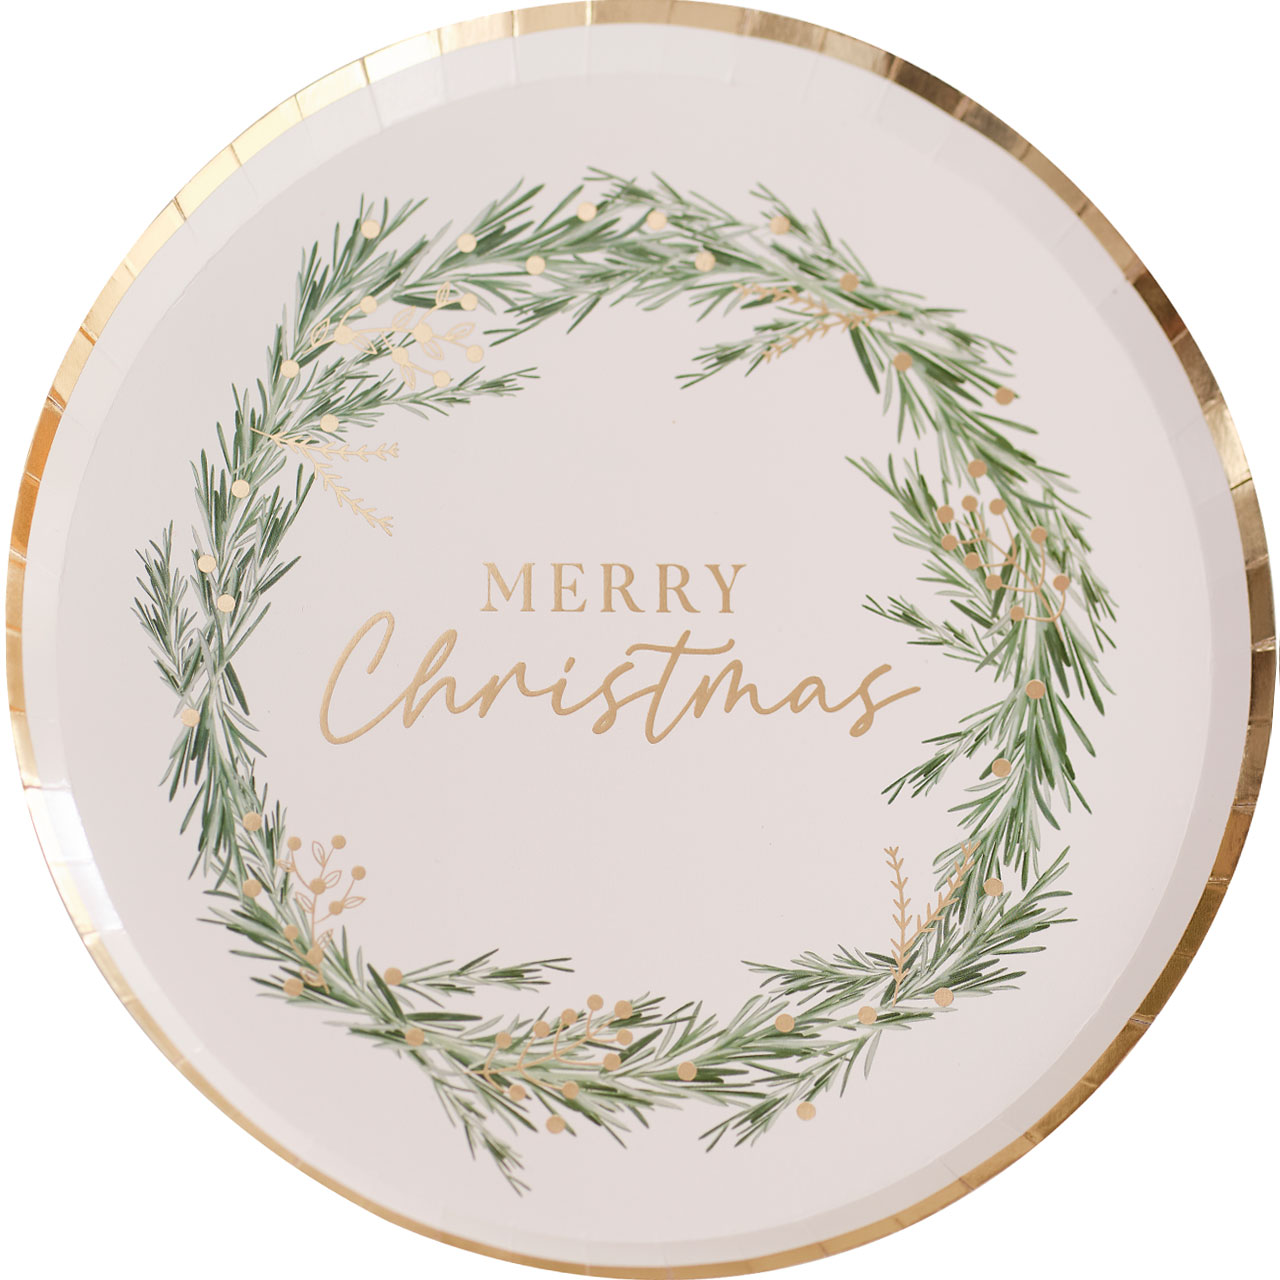 Plates - Rustic Gold Merry Christmas